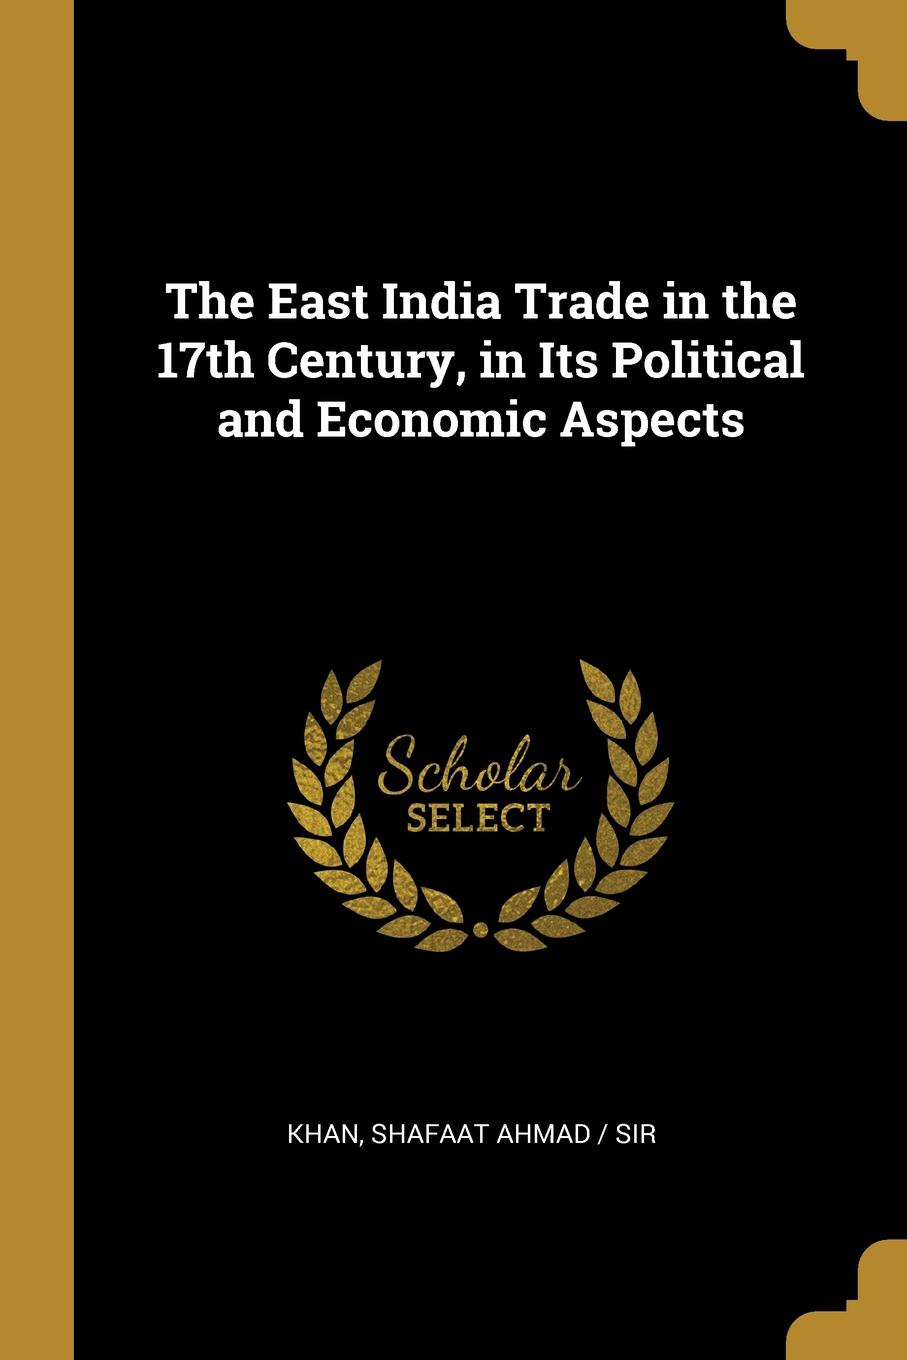 The East India Trade in the 17th Century, in Its Political and Economic Aspects